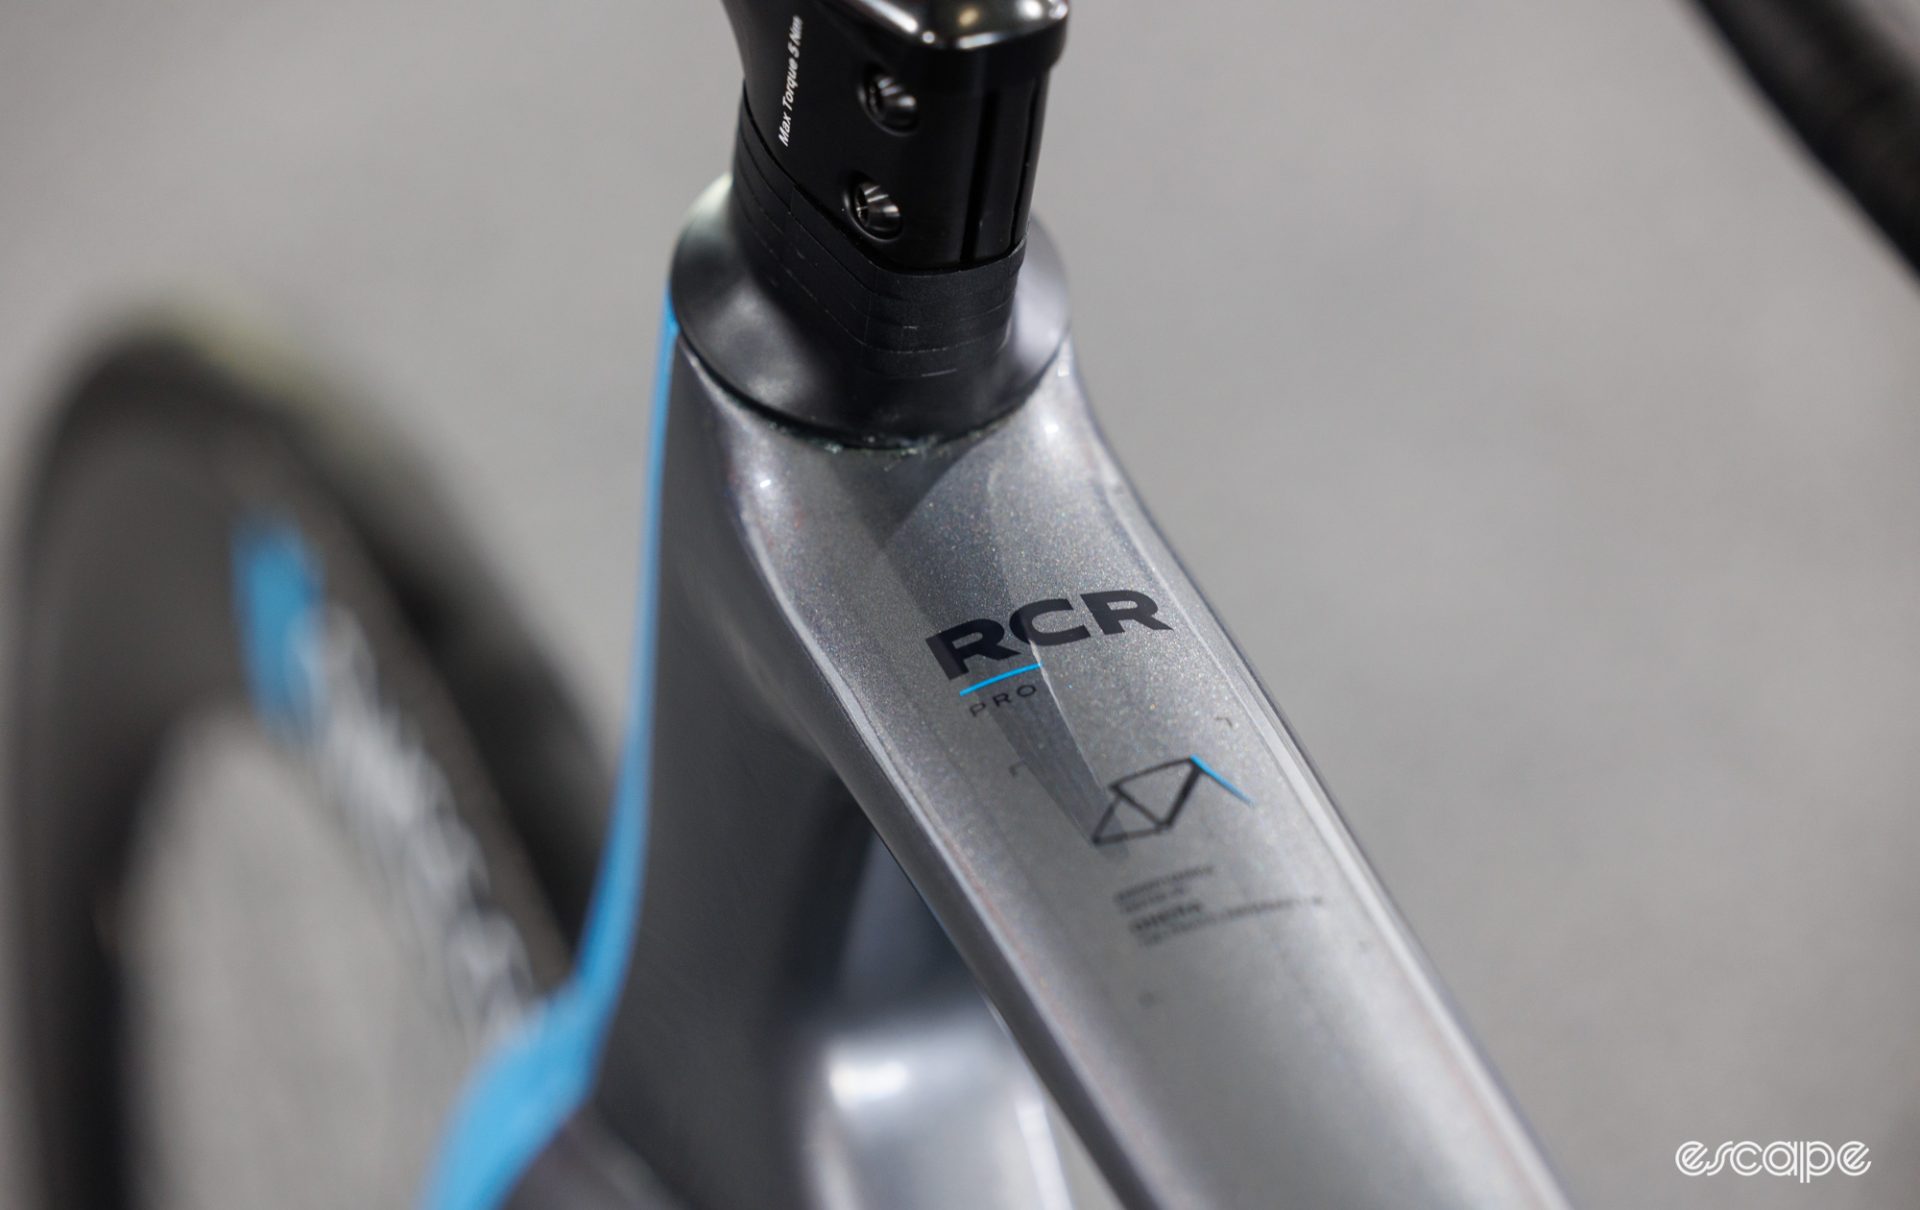 Gallery: AG2R's Van Rysel RCR Pro, the new name in the WorldTour - Escape  Collective